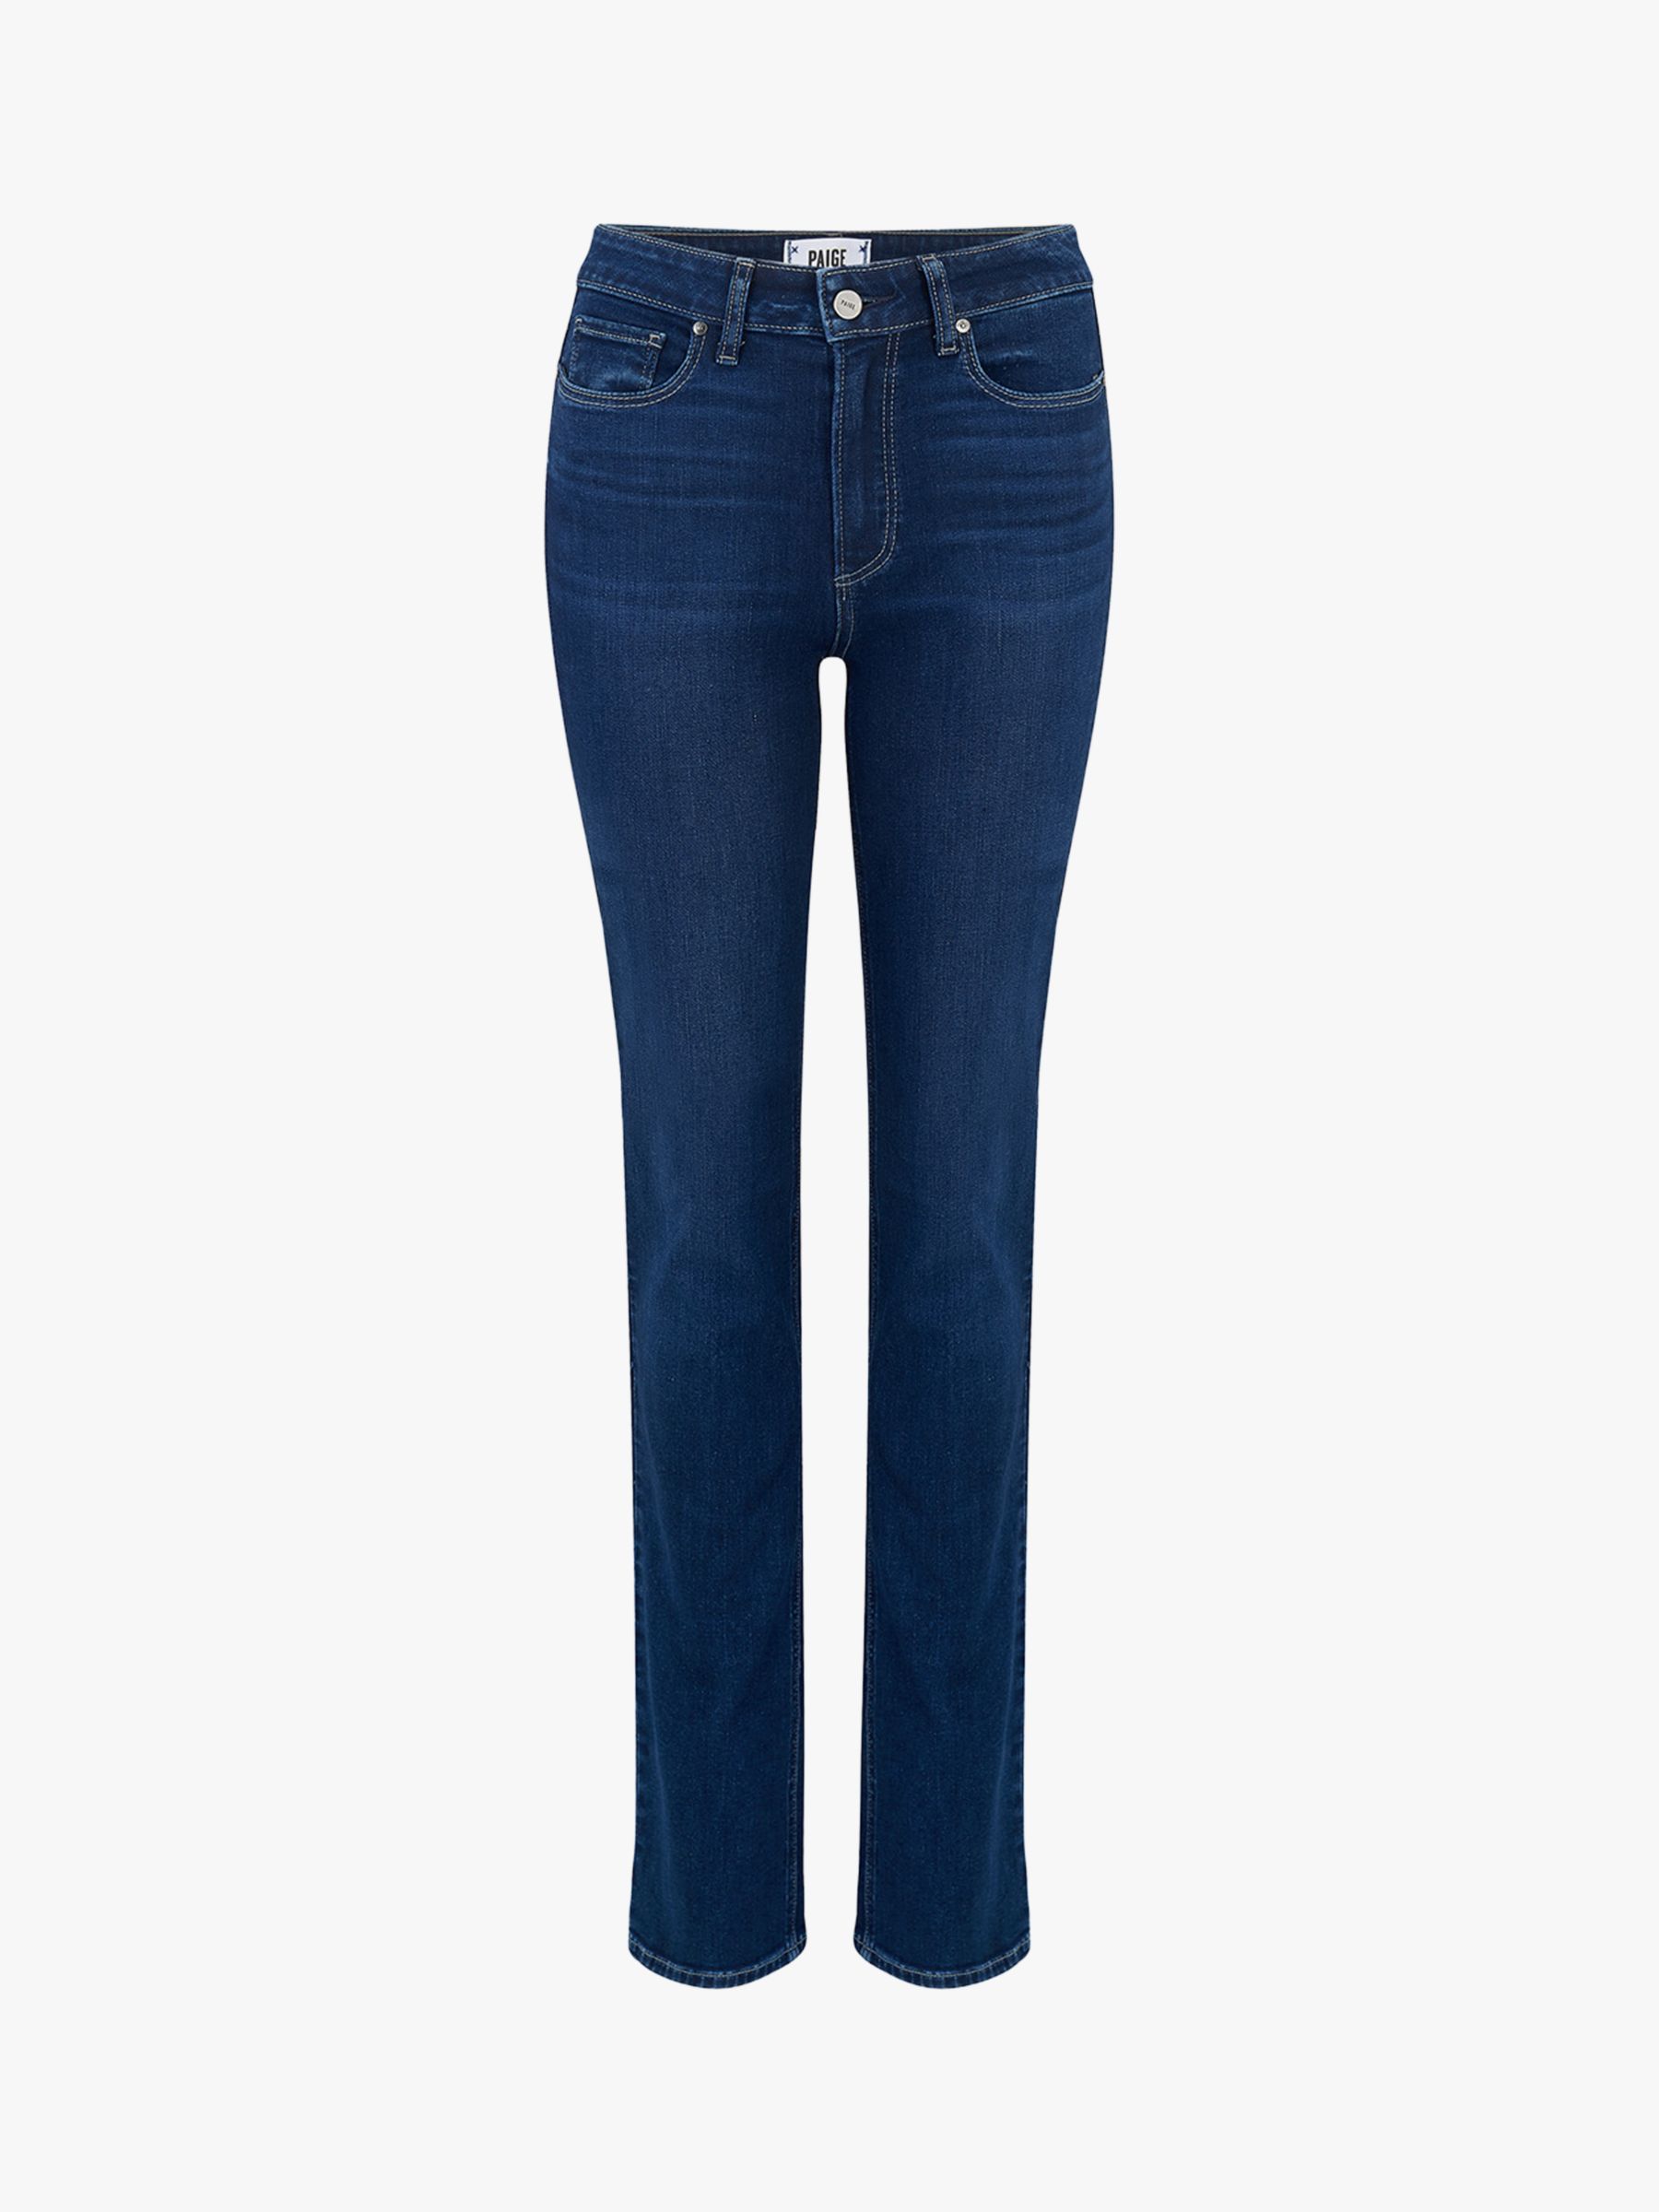 PAIGE Hoxton High Rise Straight Leg Jeans, Brentwood Mid Wash, 24